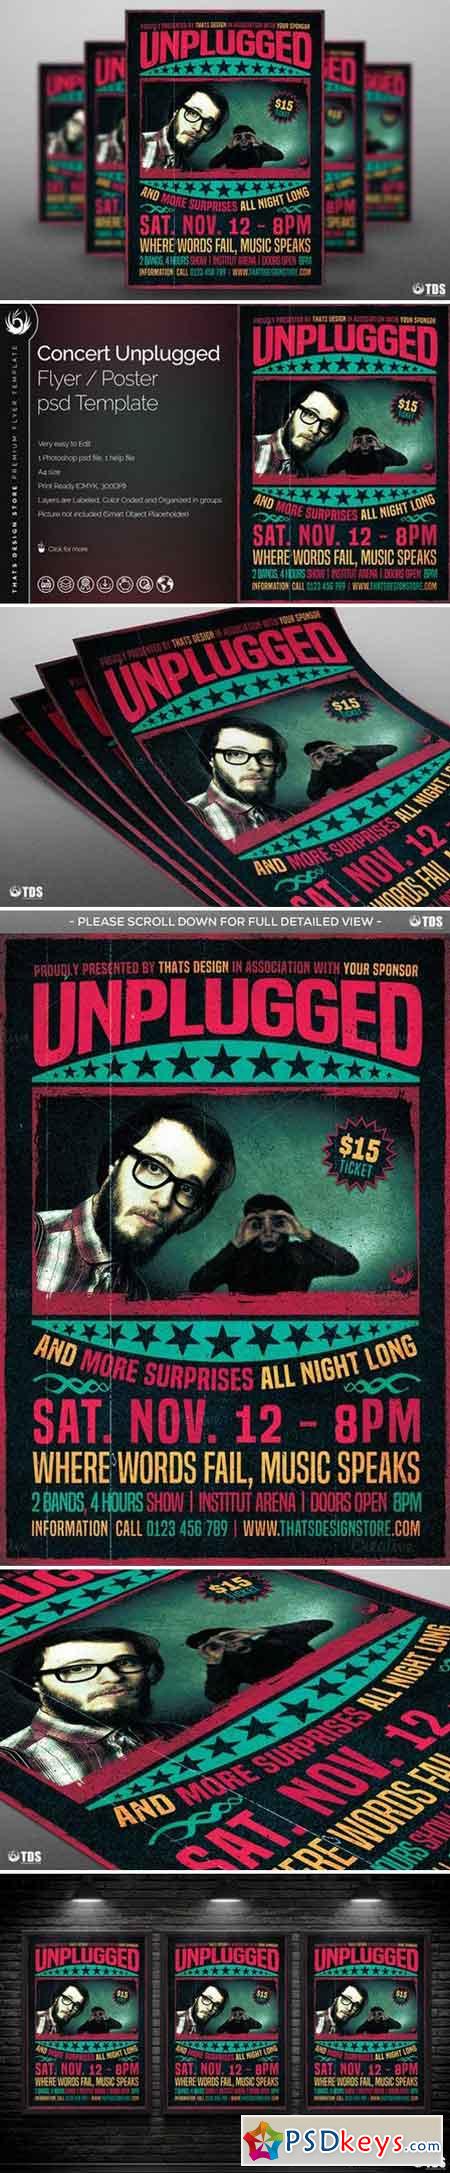 Concert Unplugged Flyer Template 791477